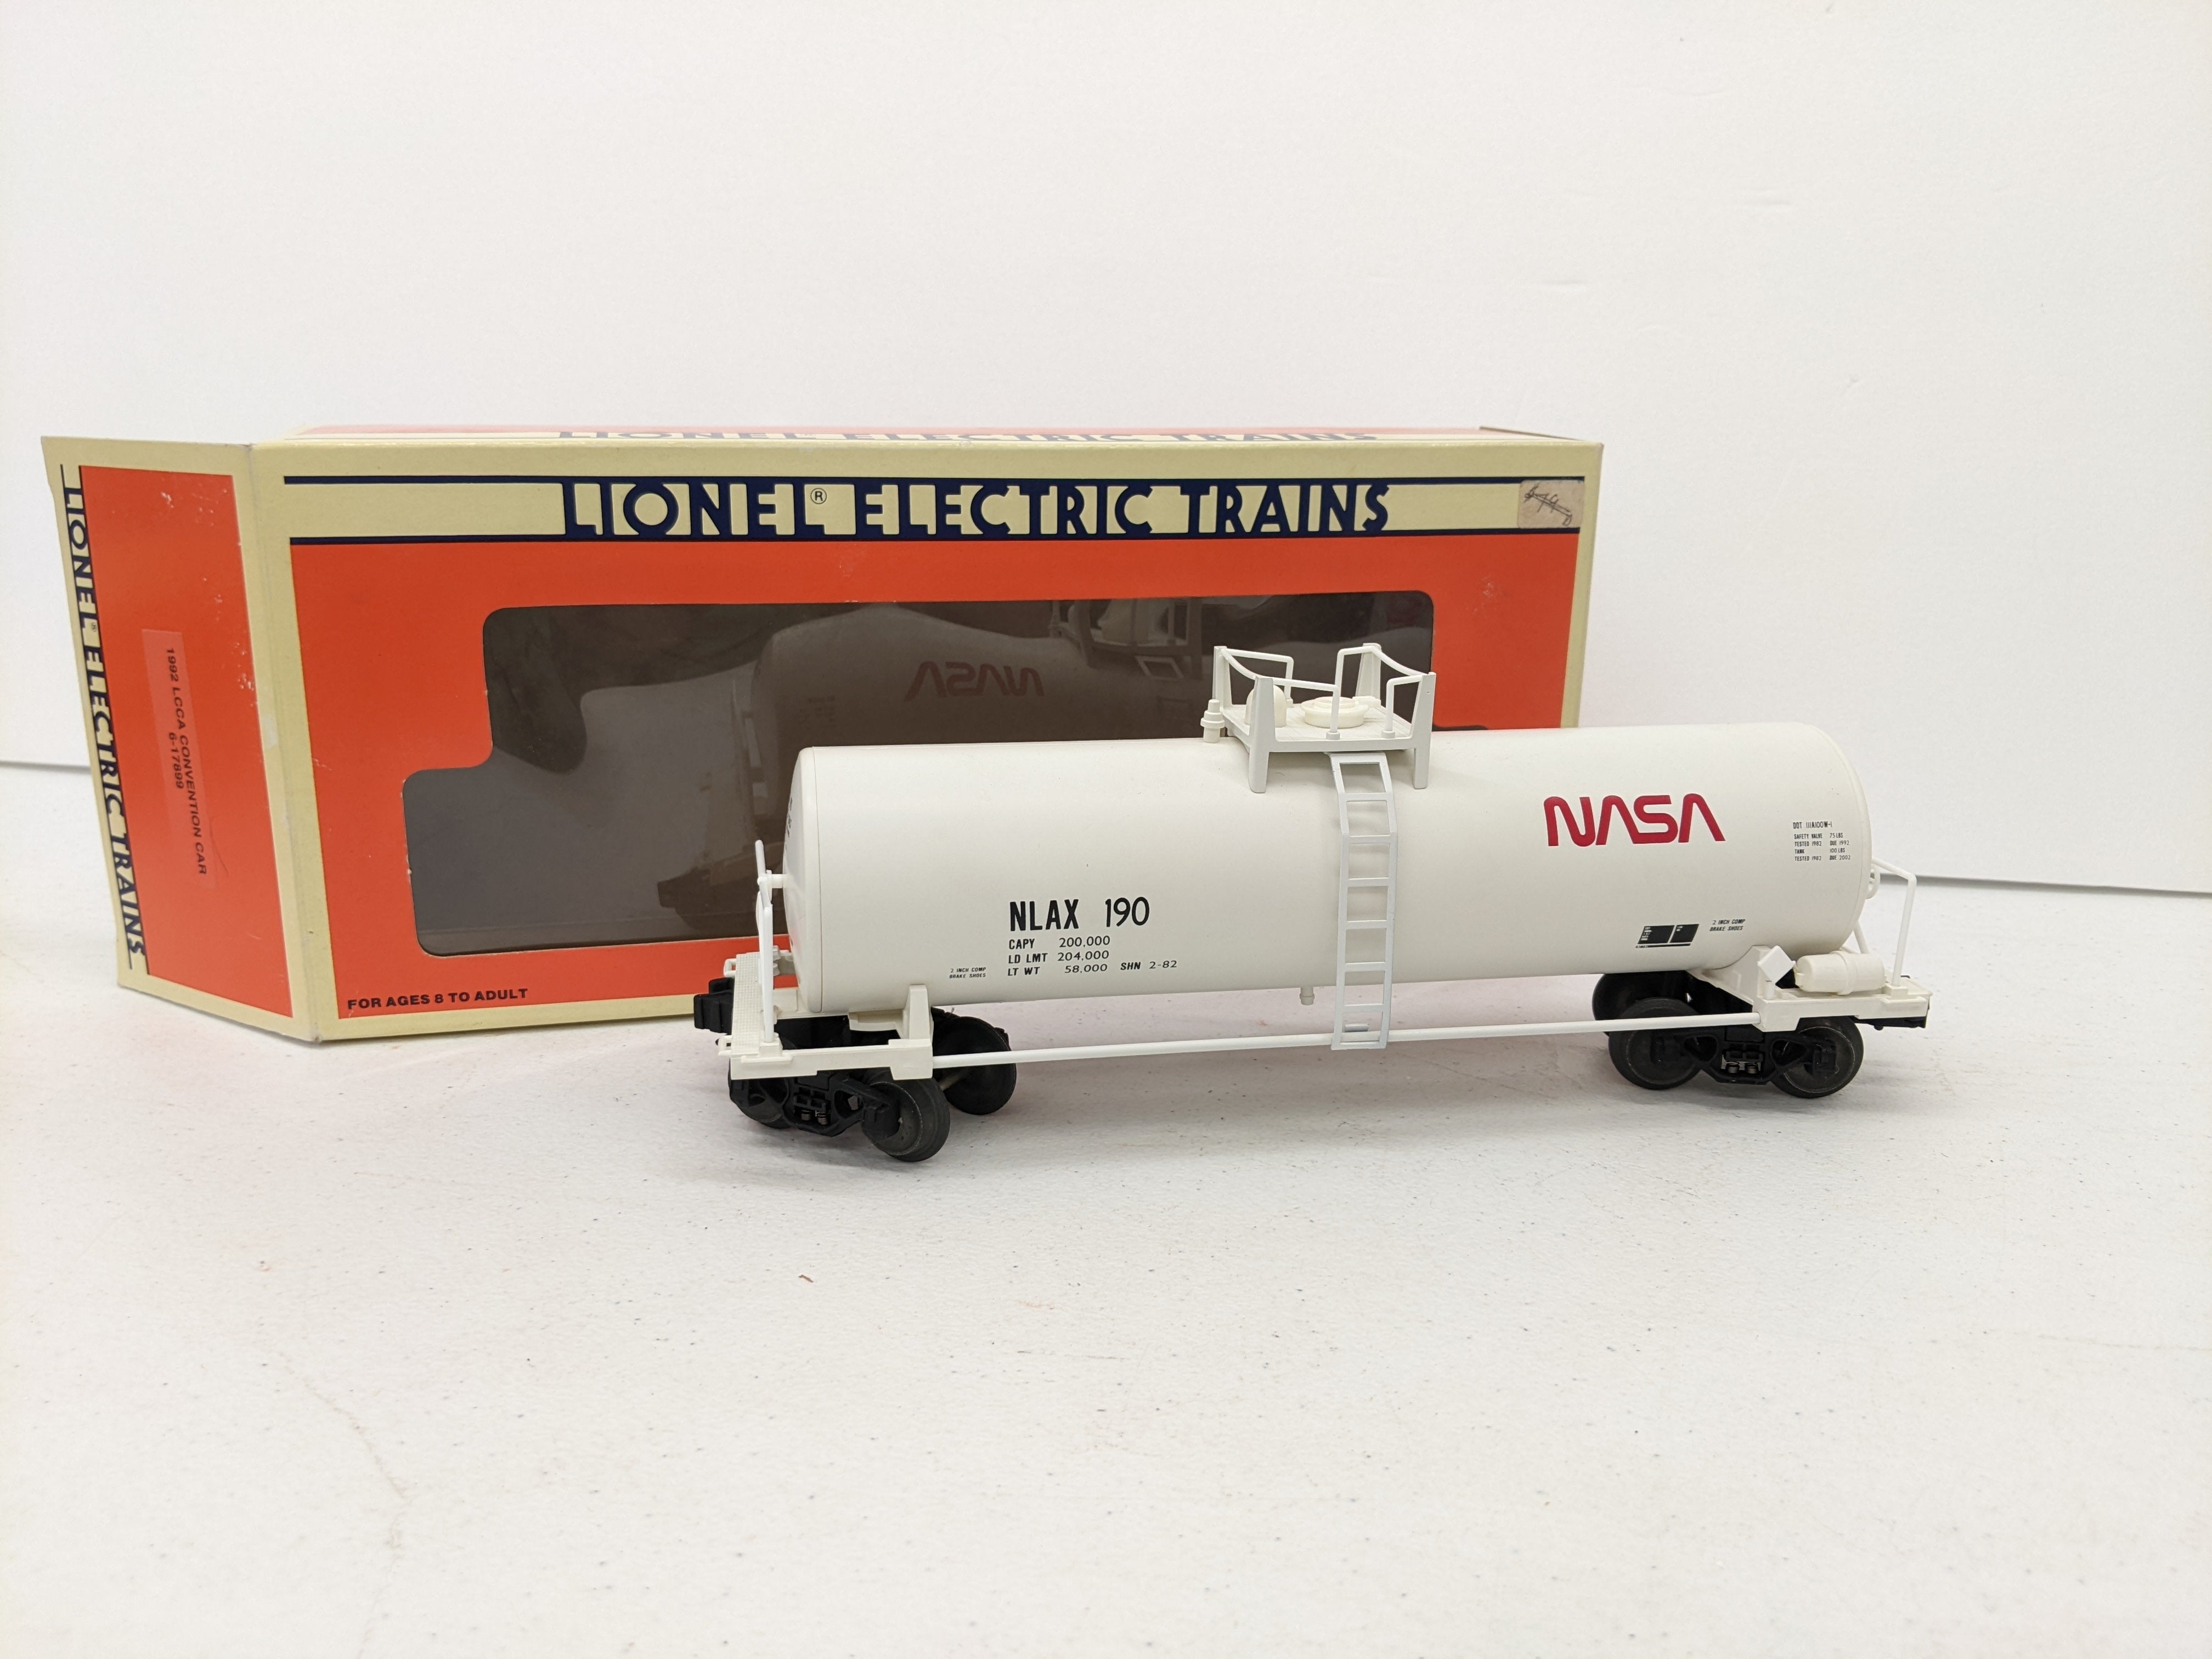 USED Lionel 6-17899 O Scale, NASA Tank CarNLAX #190, 1992 LCCA Convention Car